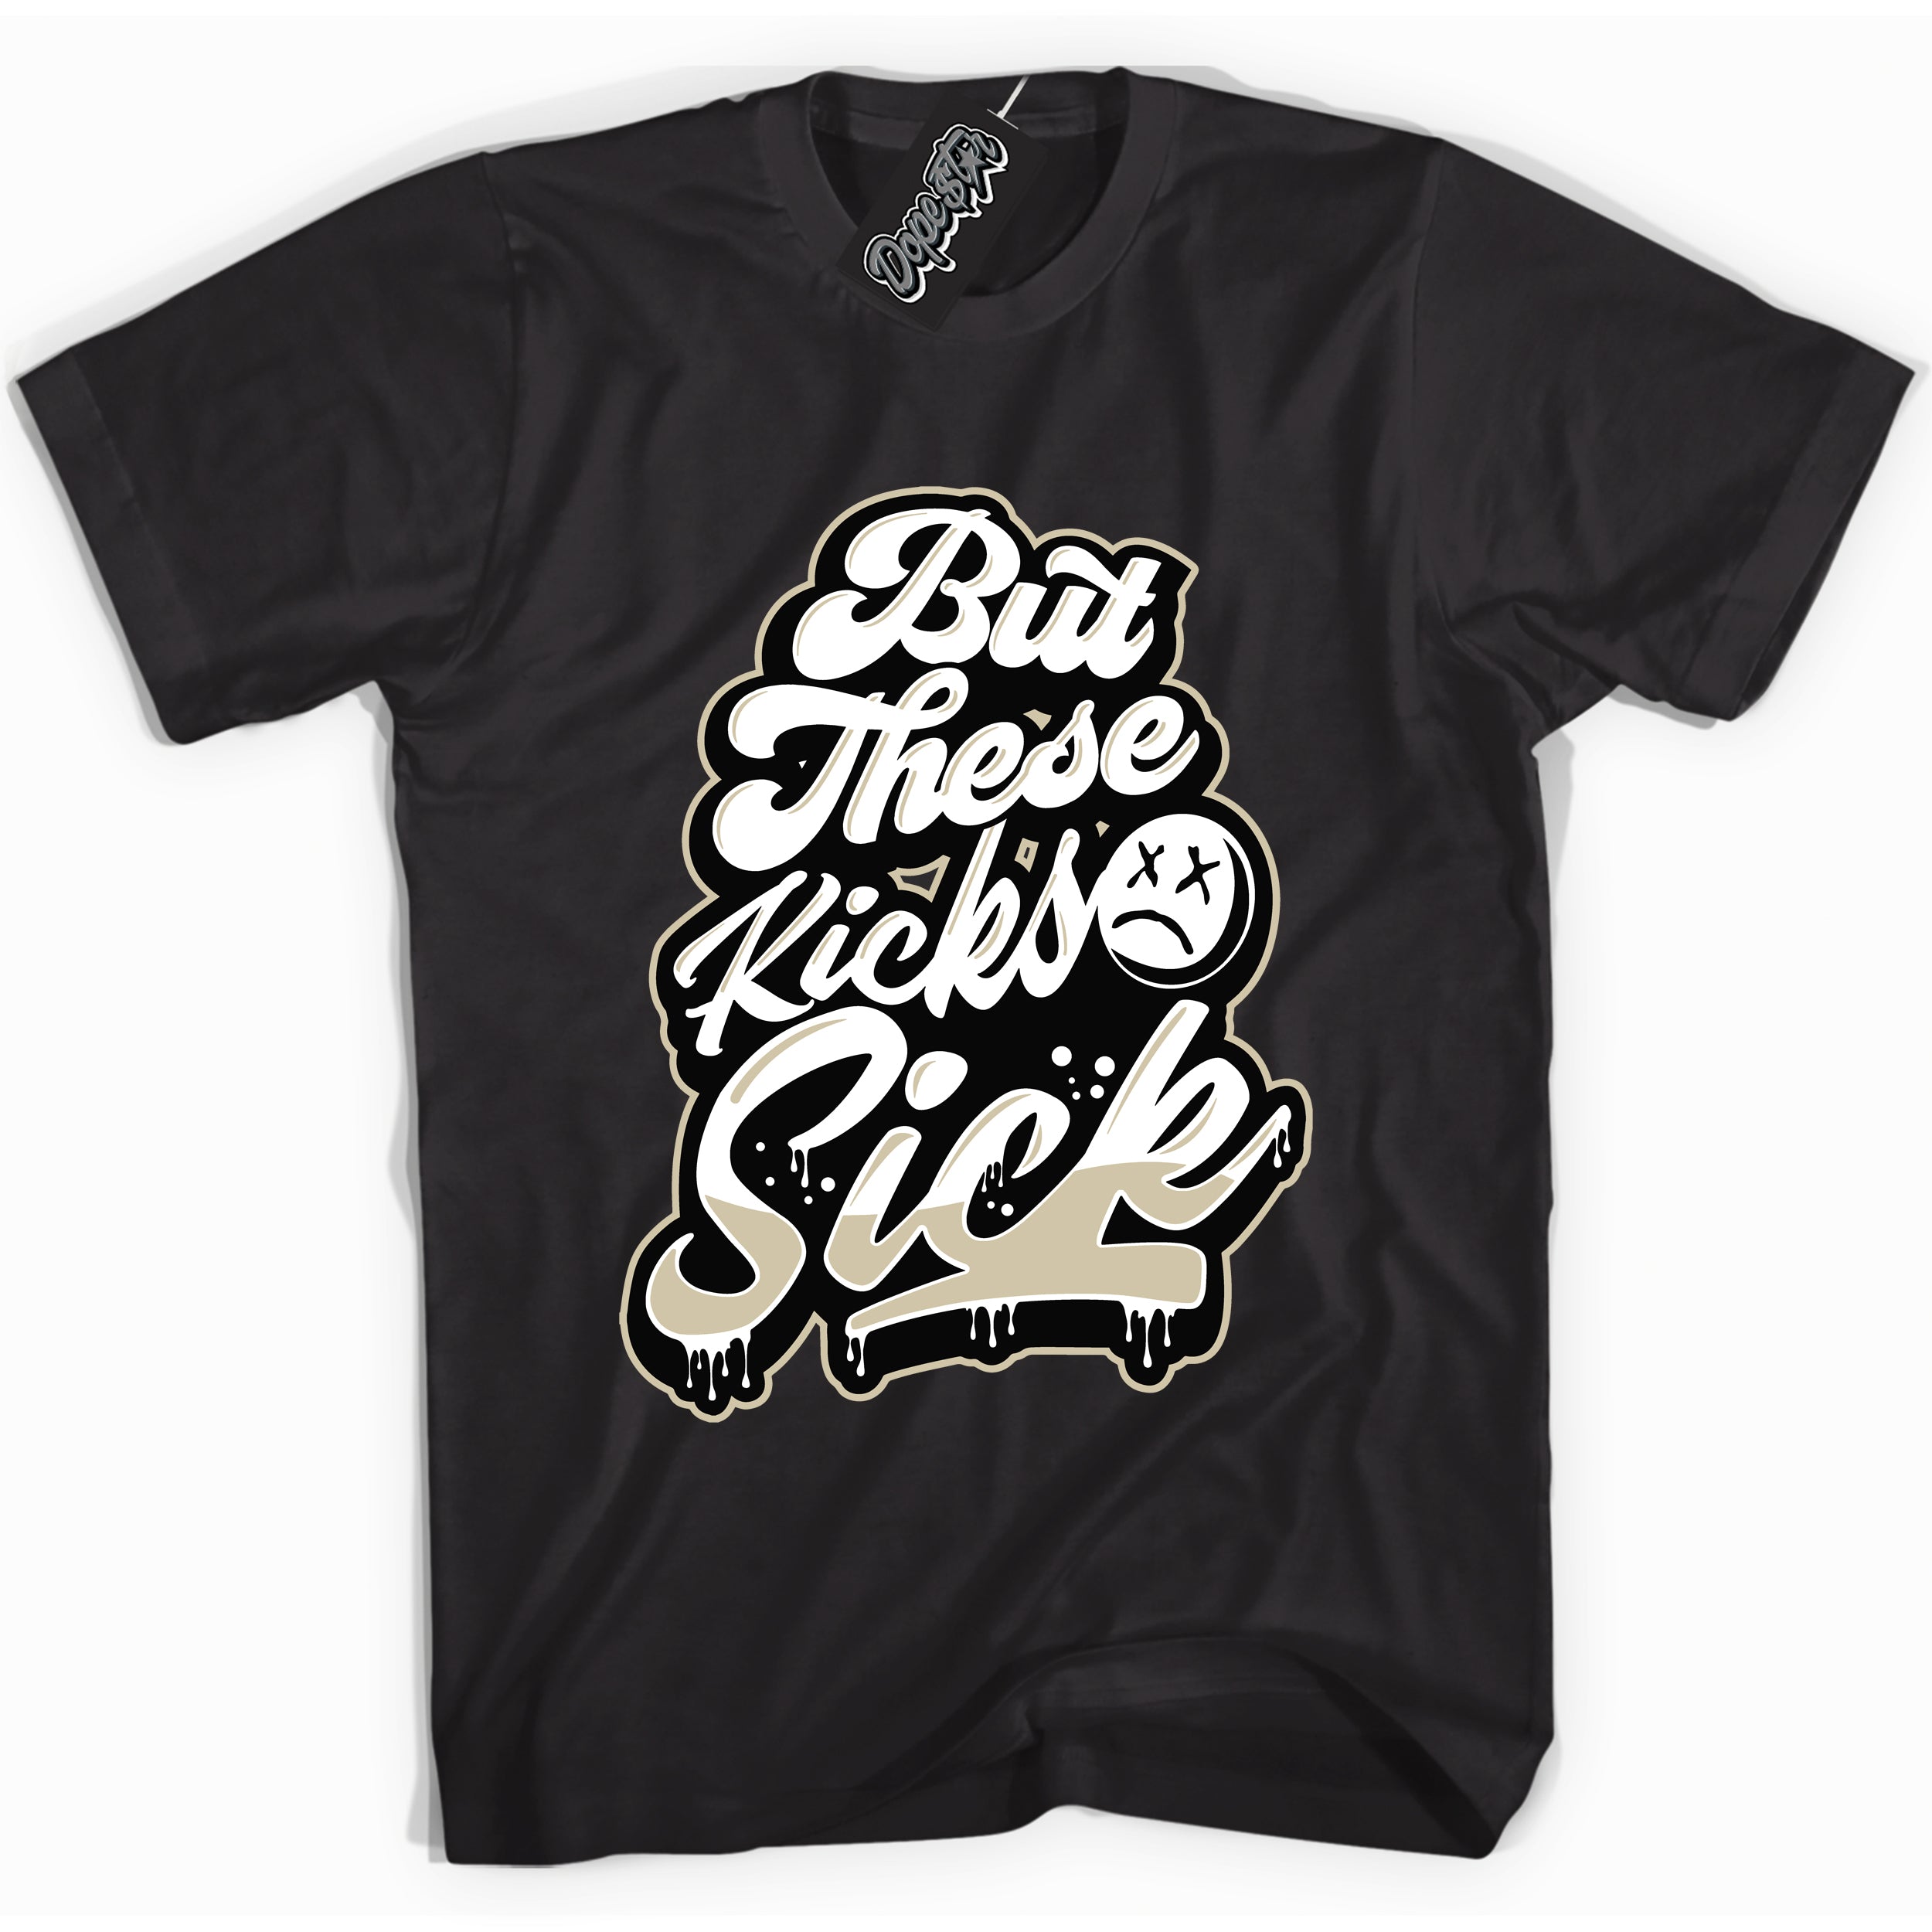 Cool Black graphic tee with “ Kicks Sick  ” print, that perfectly matches GRATITUDE 11s  sneakers 